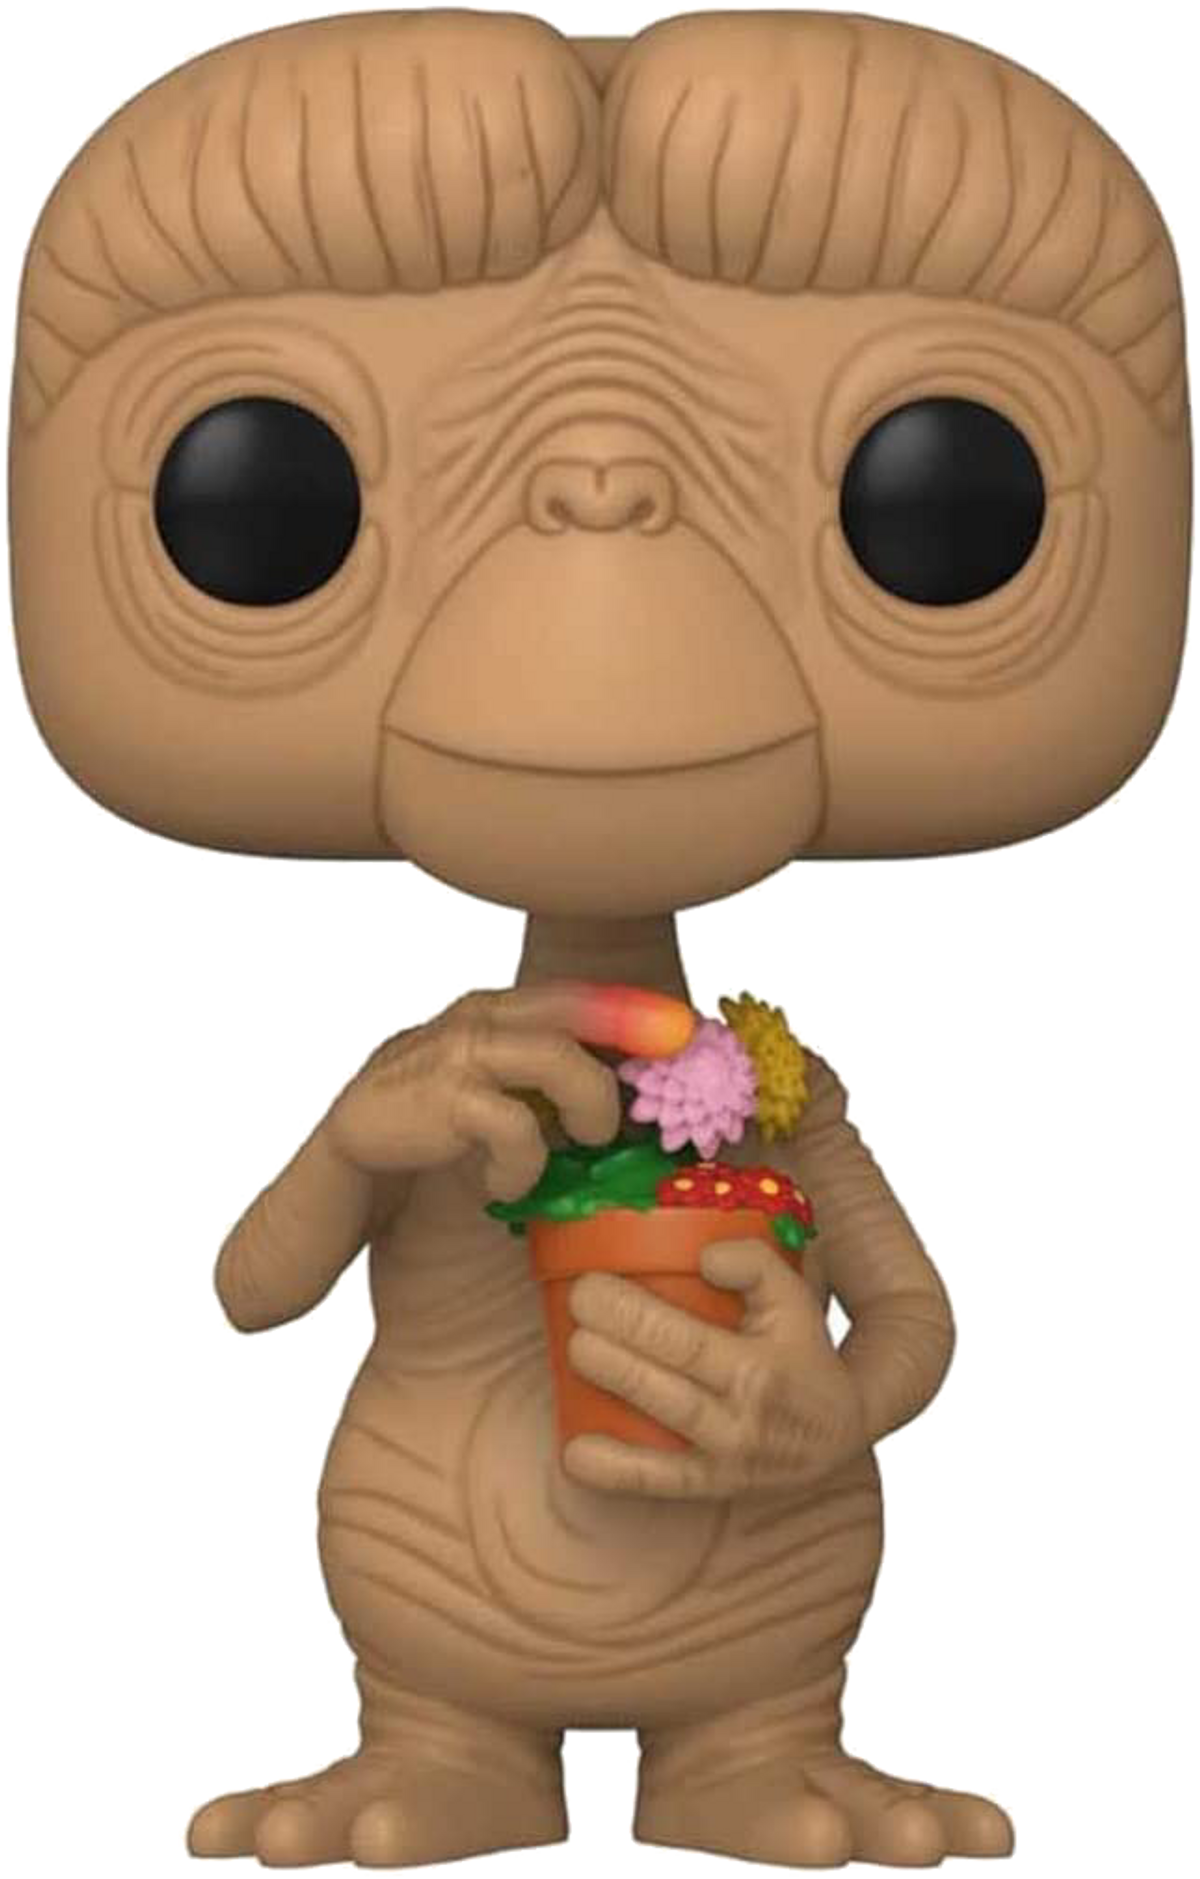 POP - 40th E.T. - Anniversary E.T. with Flowers